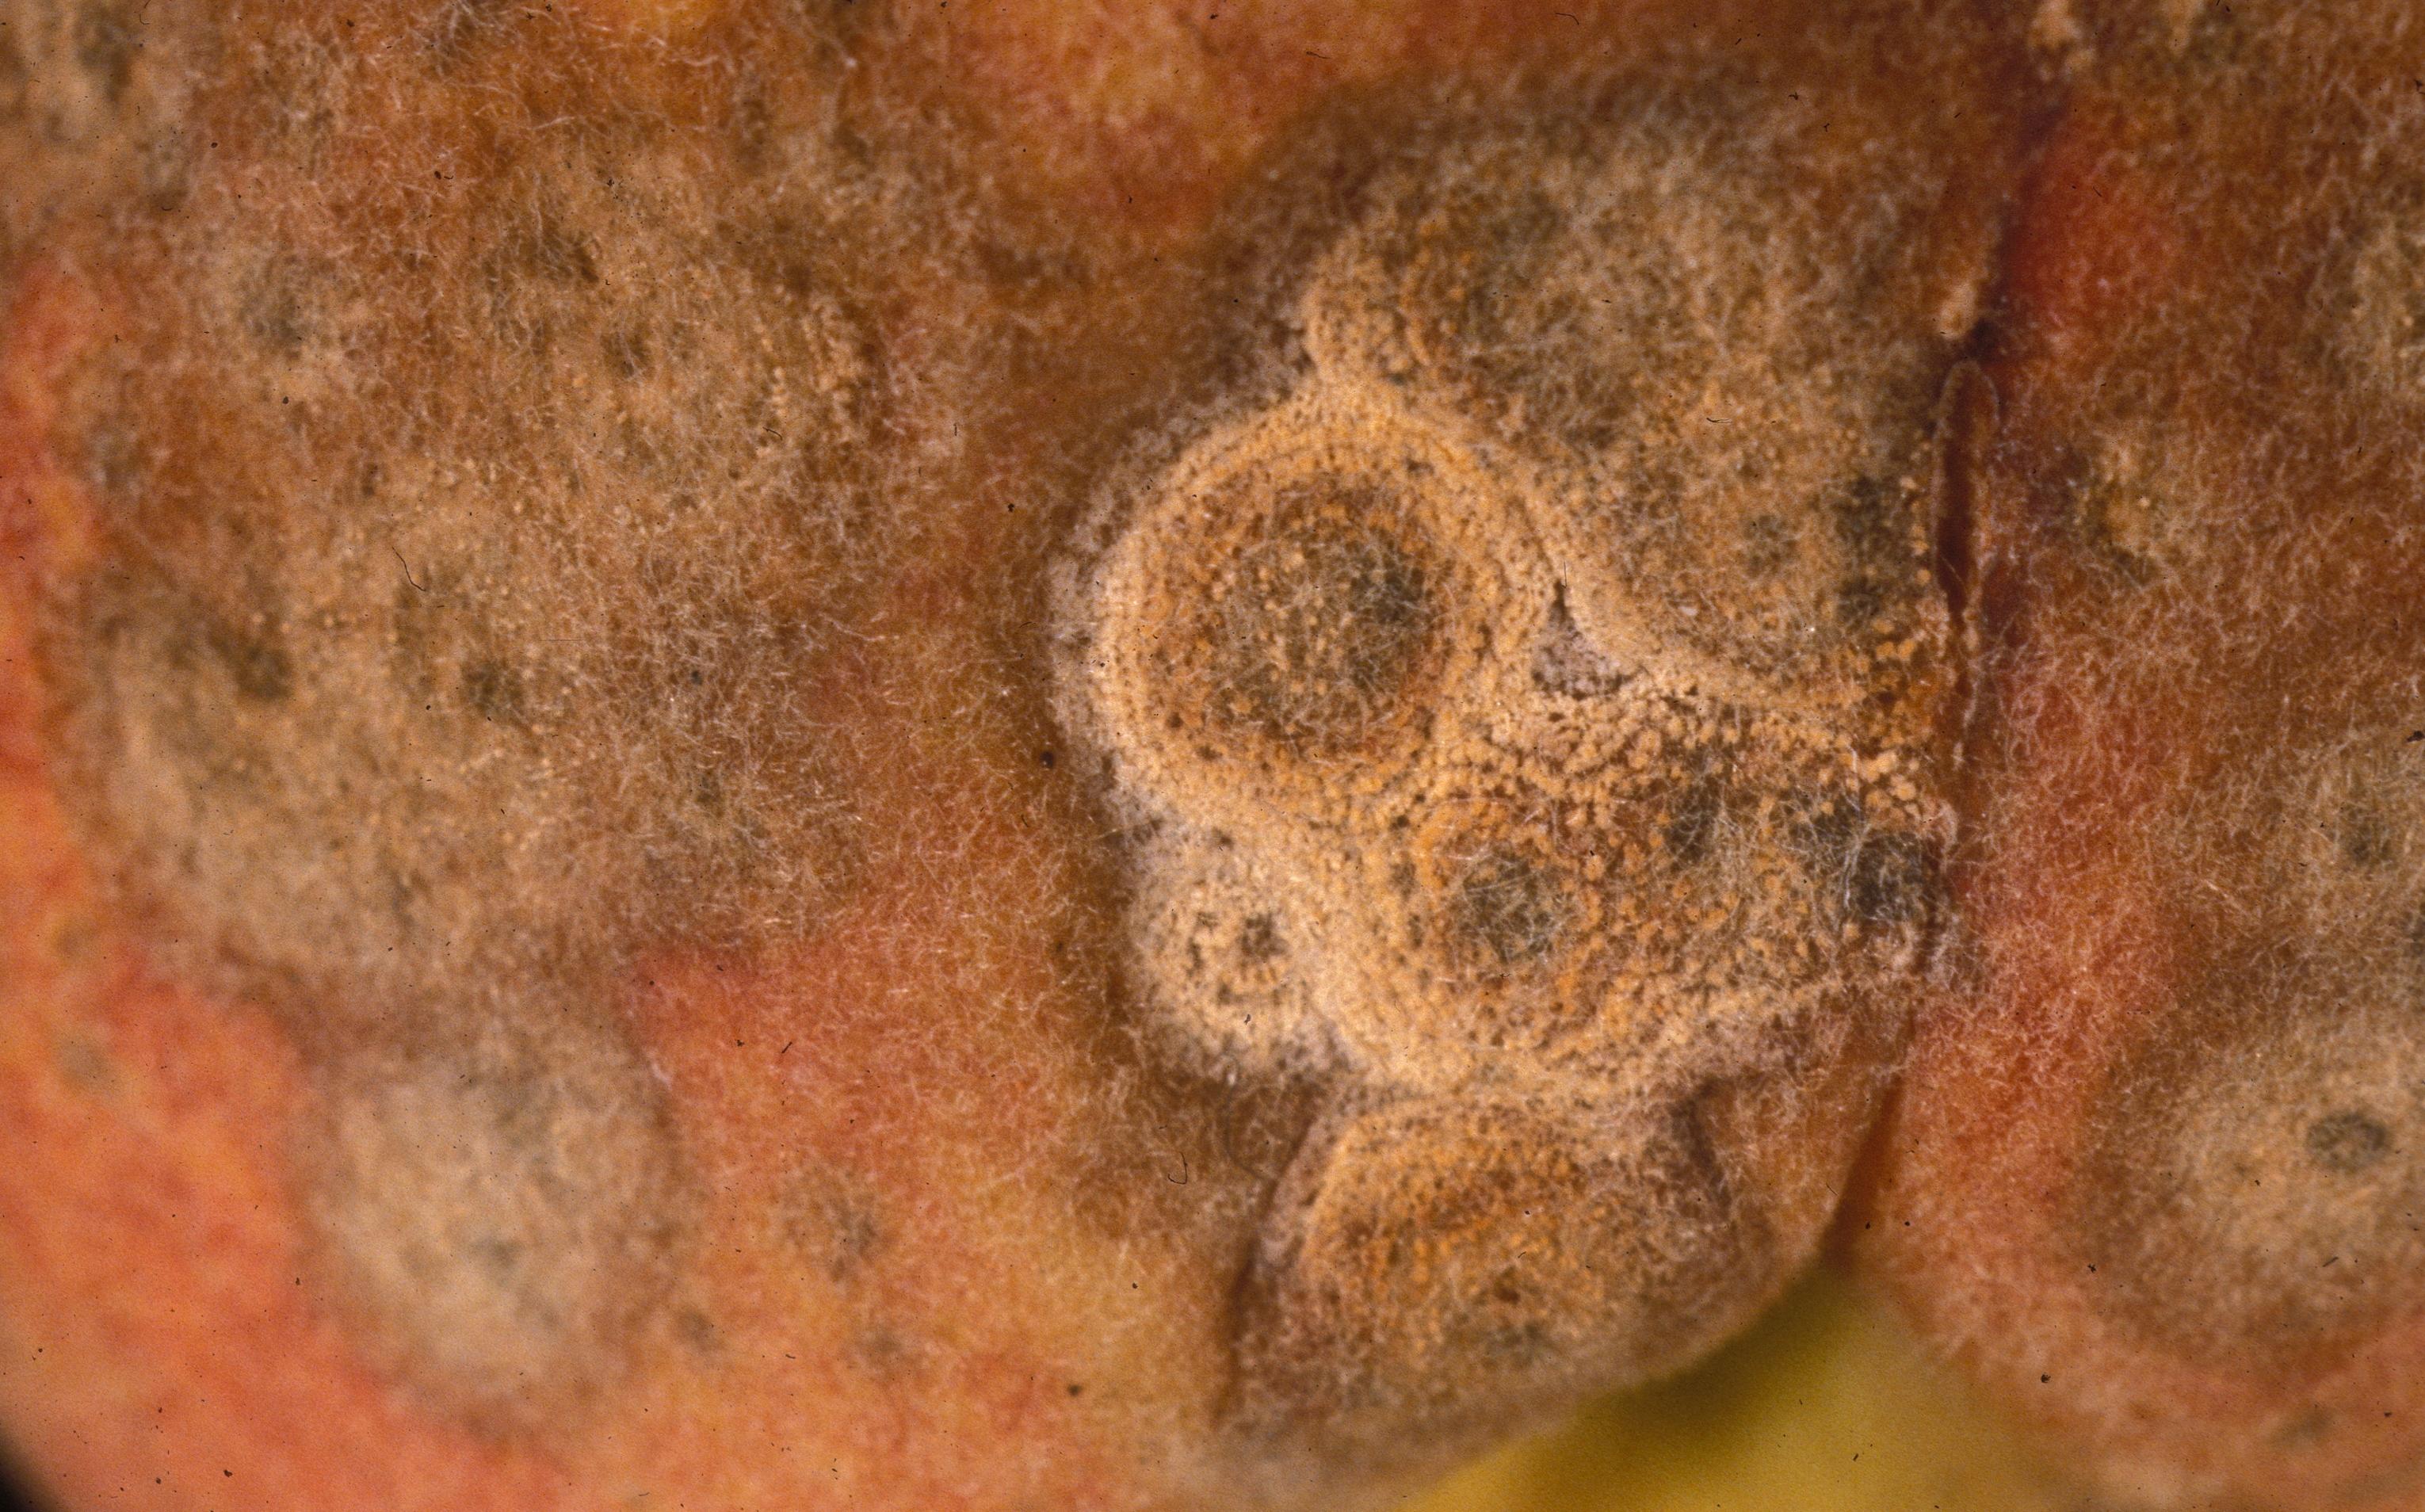 Close-up of Anthracnose fruit rot lesions with exuding spore masses. (Photo: University of Georgia Plant Pathology, University of Georgia, Bugwood.org)